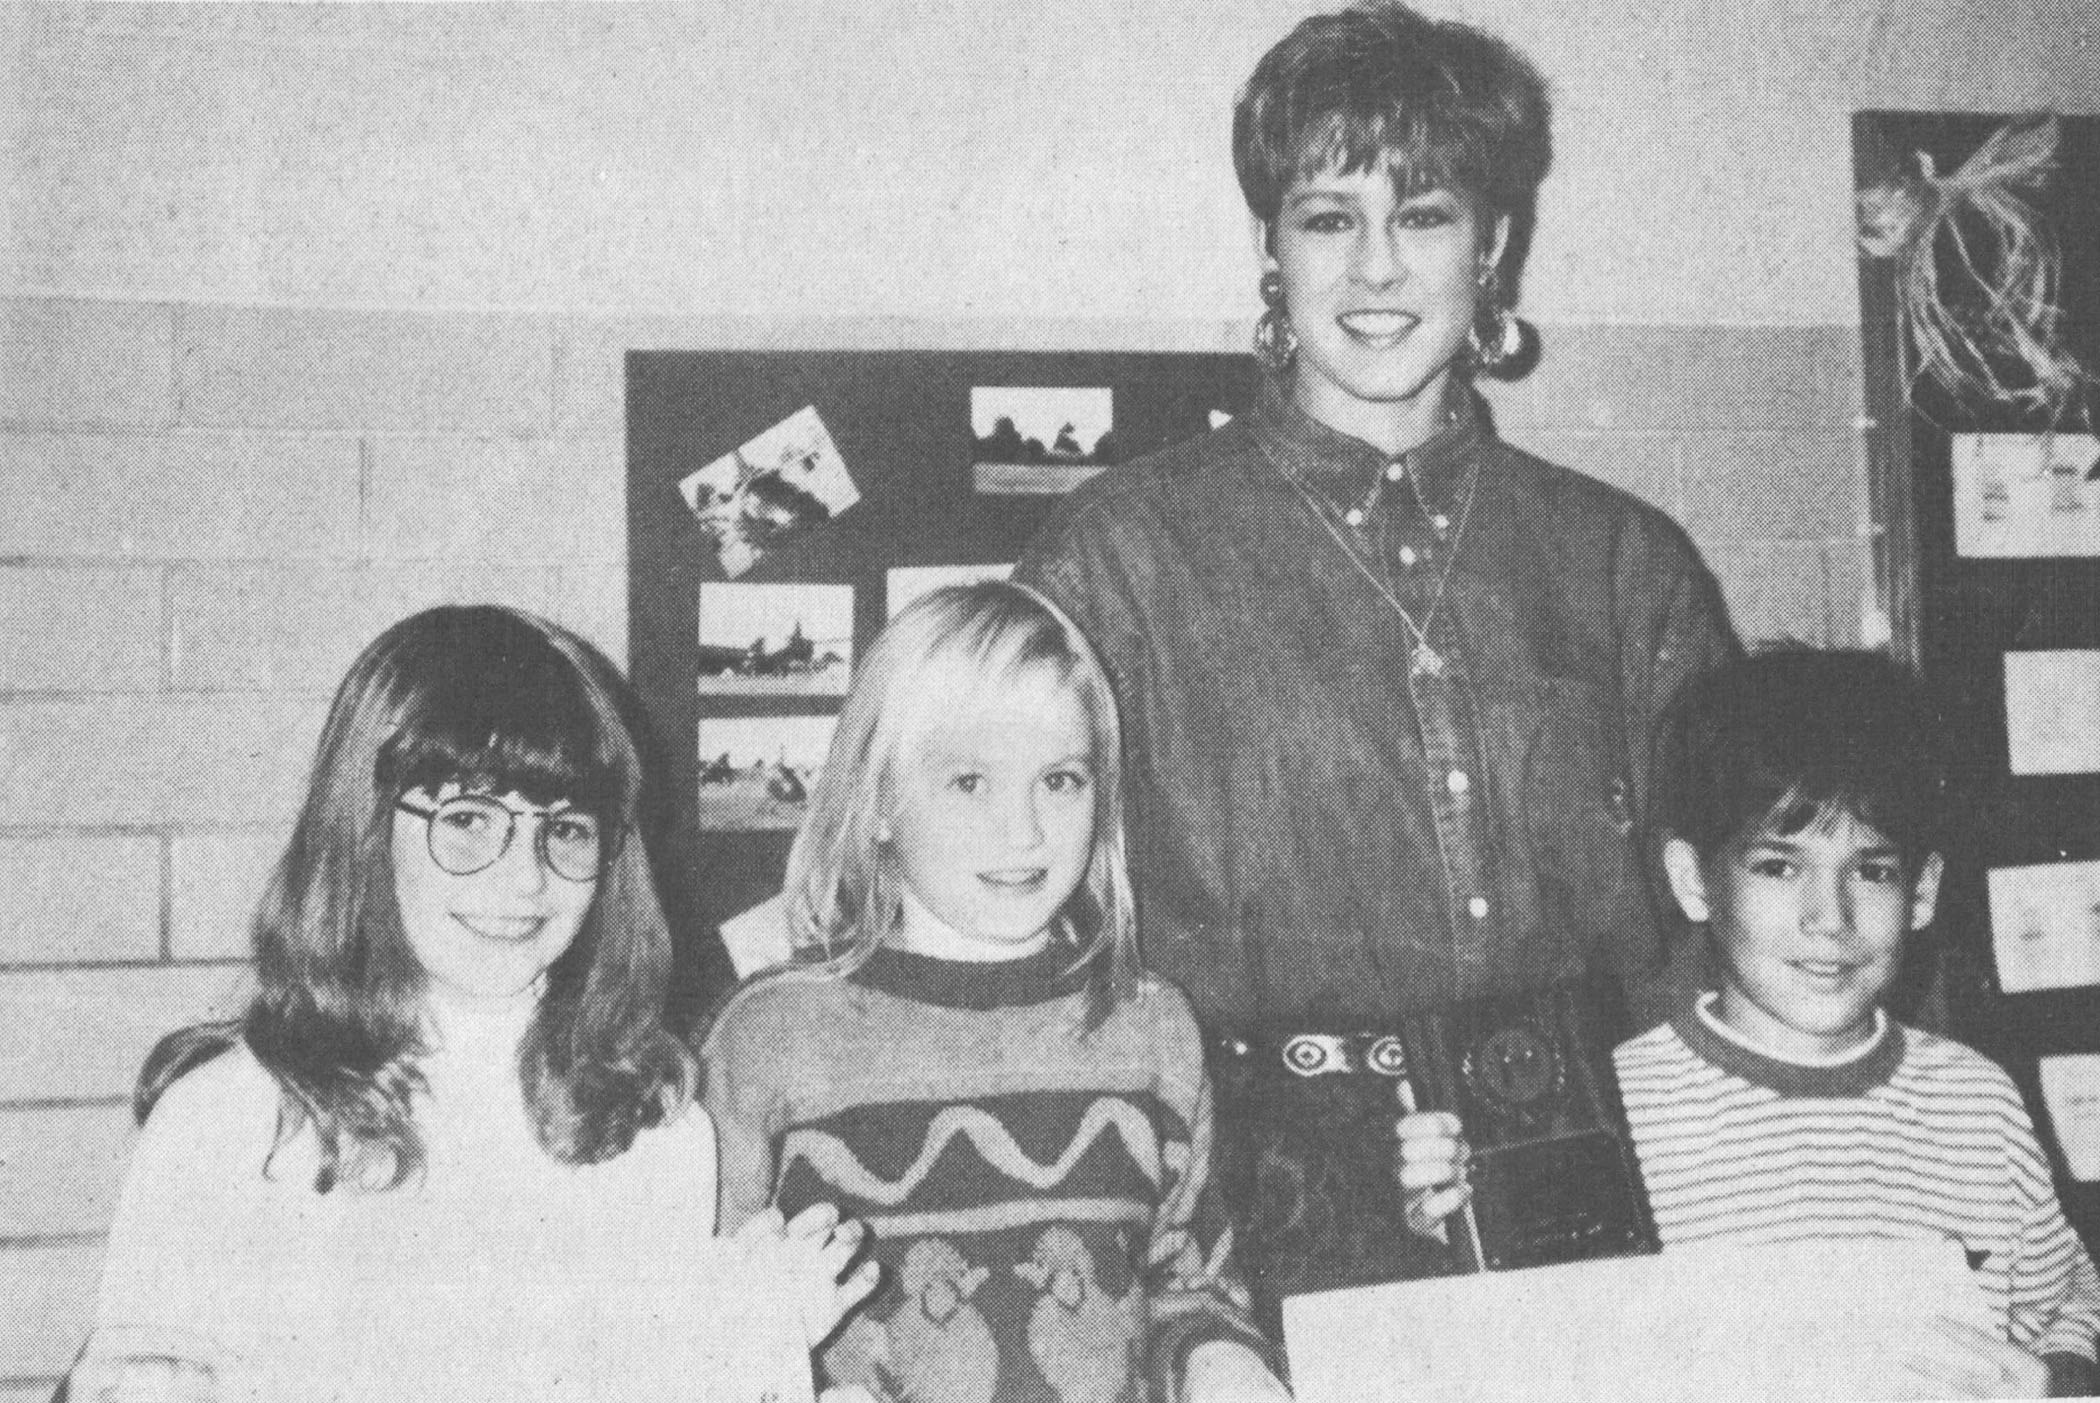 Lighted Christmas parade organizer Kelly Moody, center, presented plaques to poster contest winners and ribbons to secondand third-place winners. Winners from East Elementary were, from left, Jessica Wilson, third place, Erica Dow, second place, and Justin Pounds, first place. Original photo published December 7, 1993.